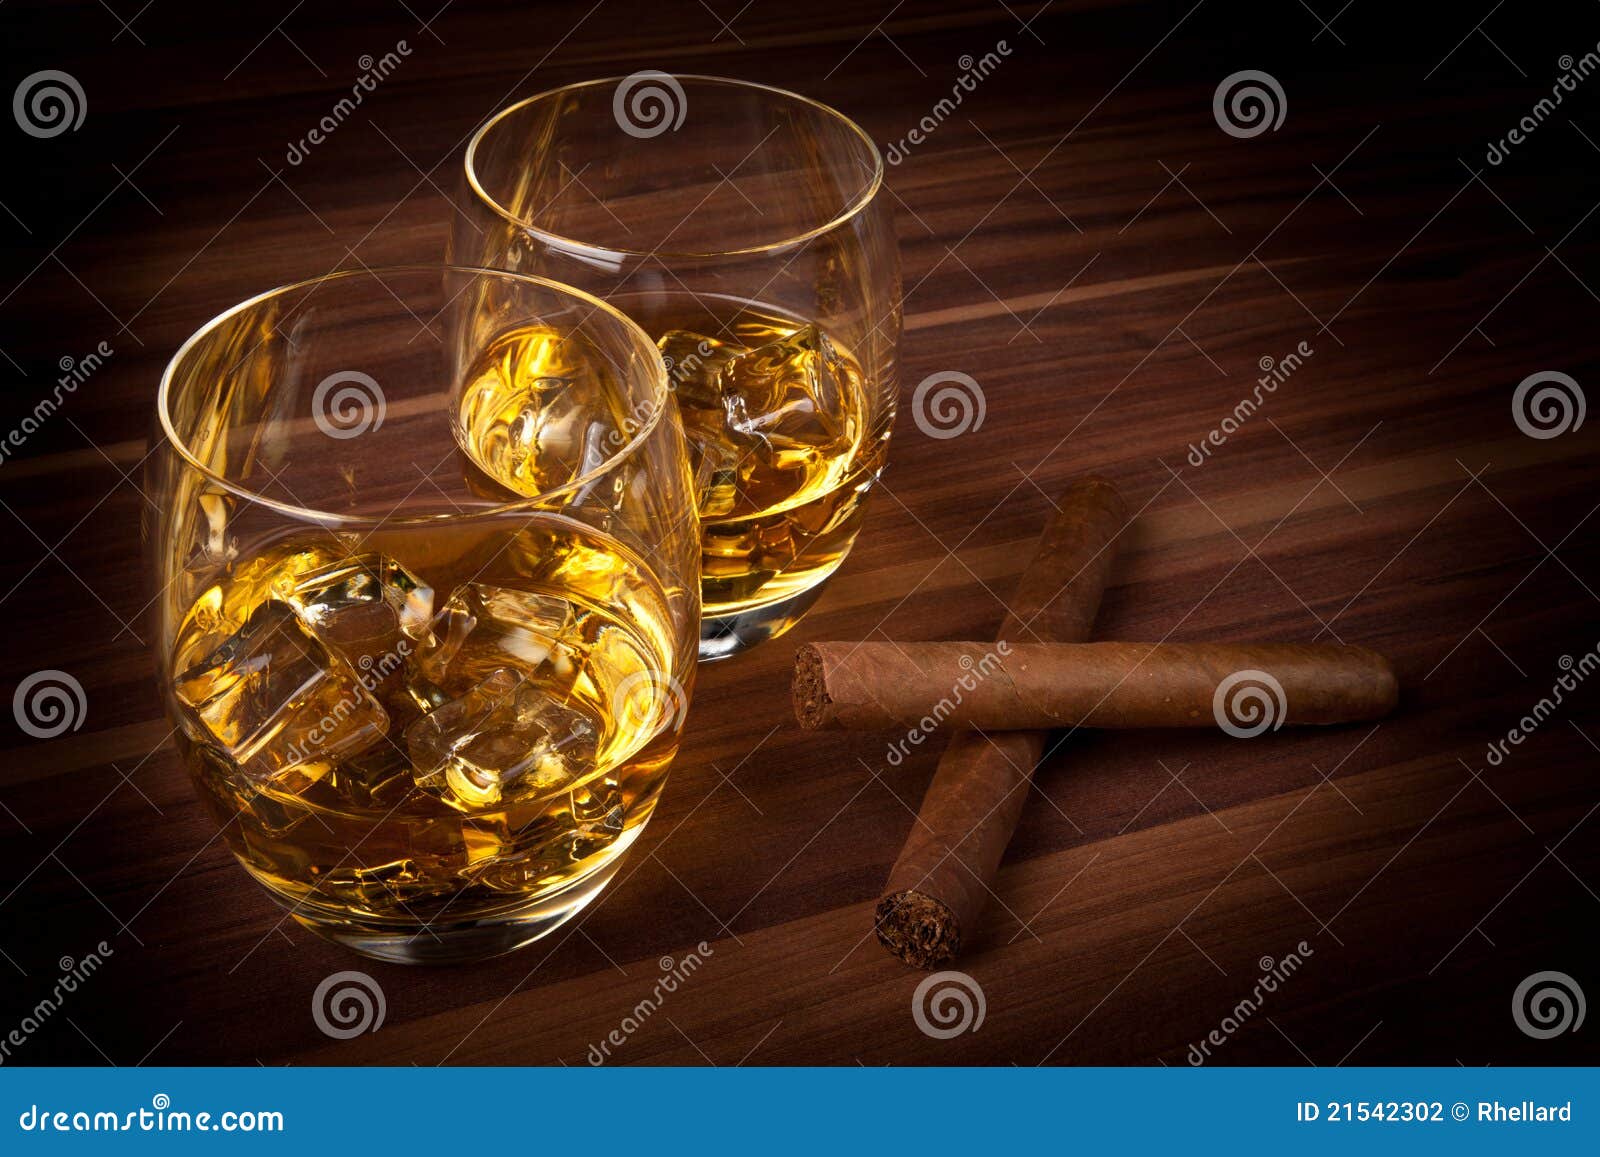 whiskey with cigars